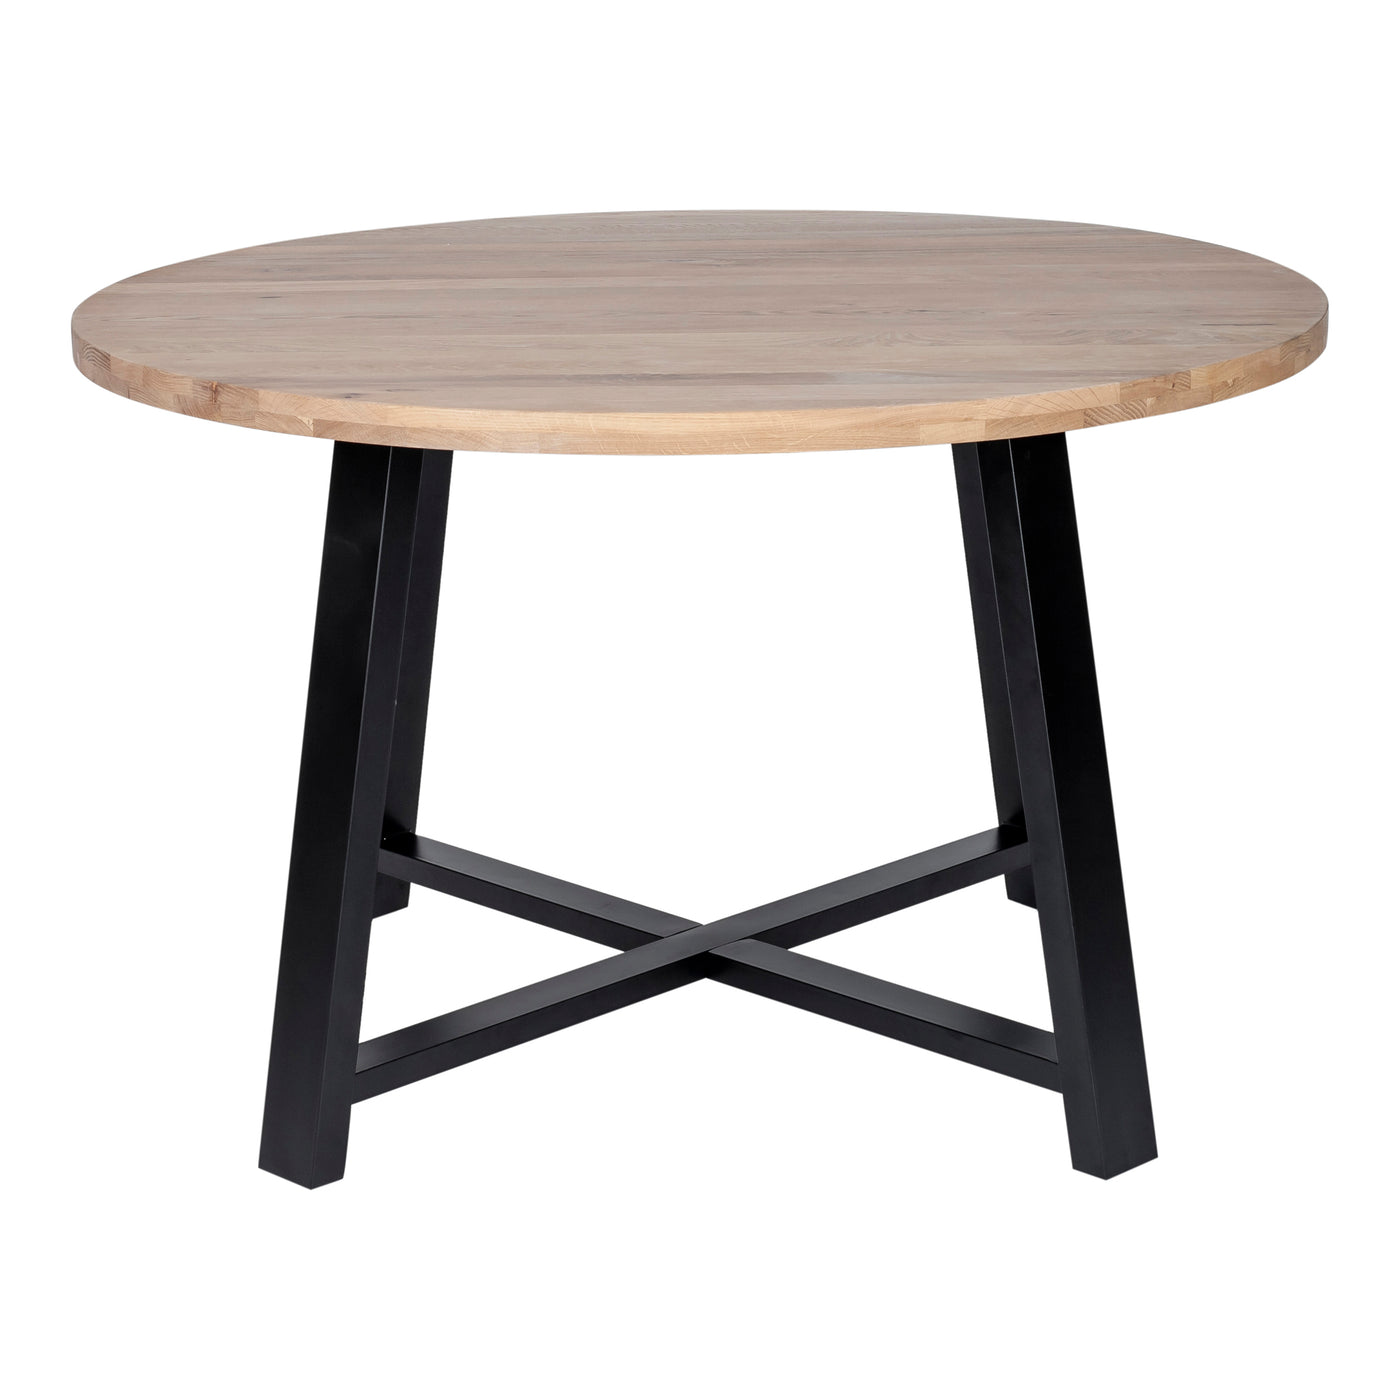 The Mila dining table molds the beauty of nature with contemporary design. A round live edge tabletop made from a spacious...